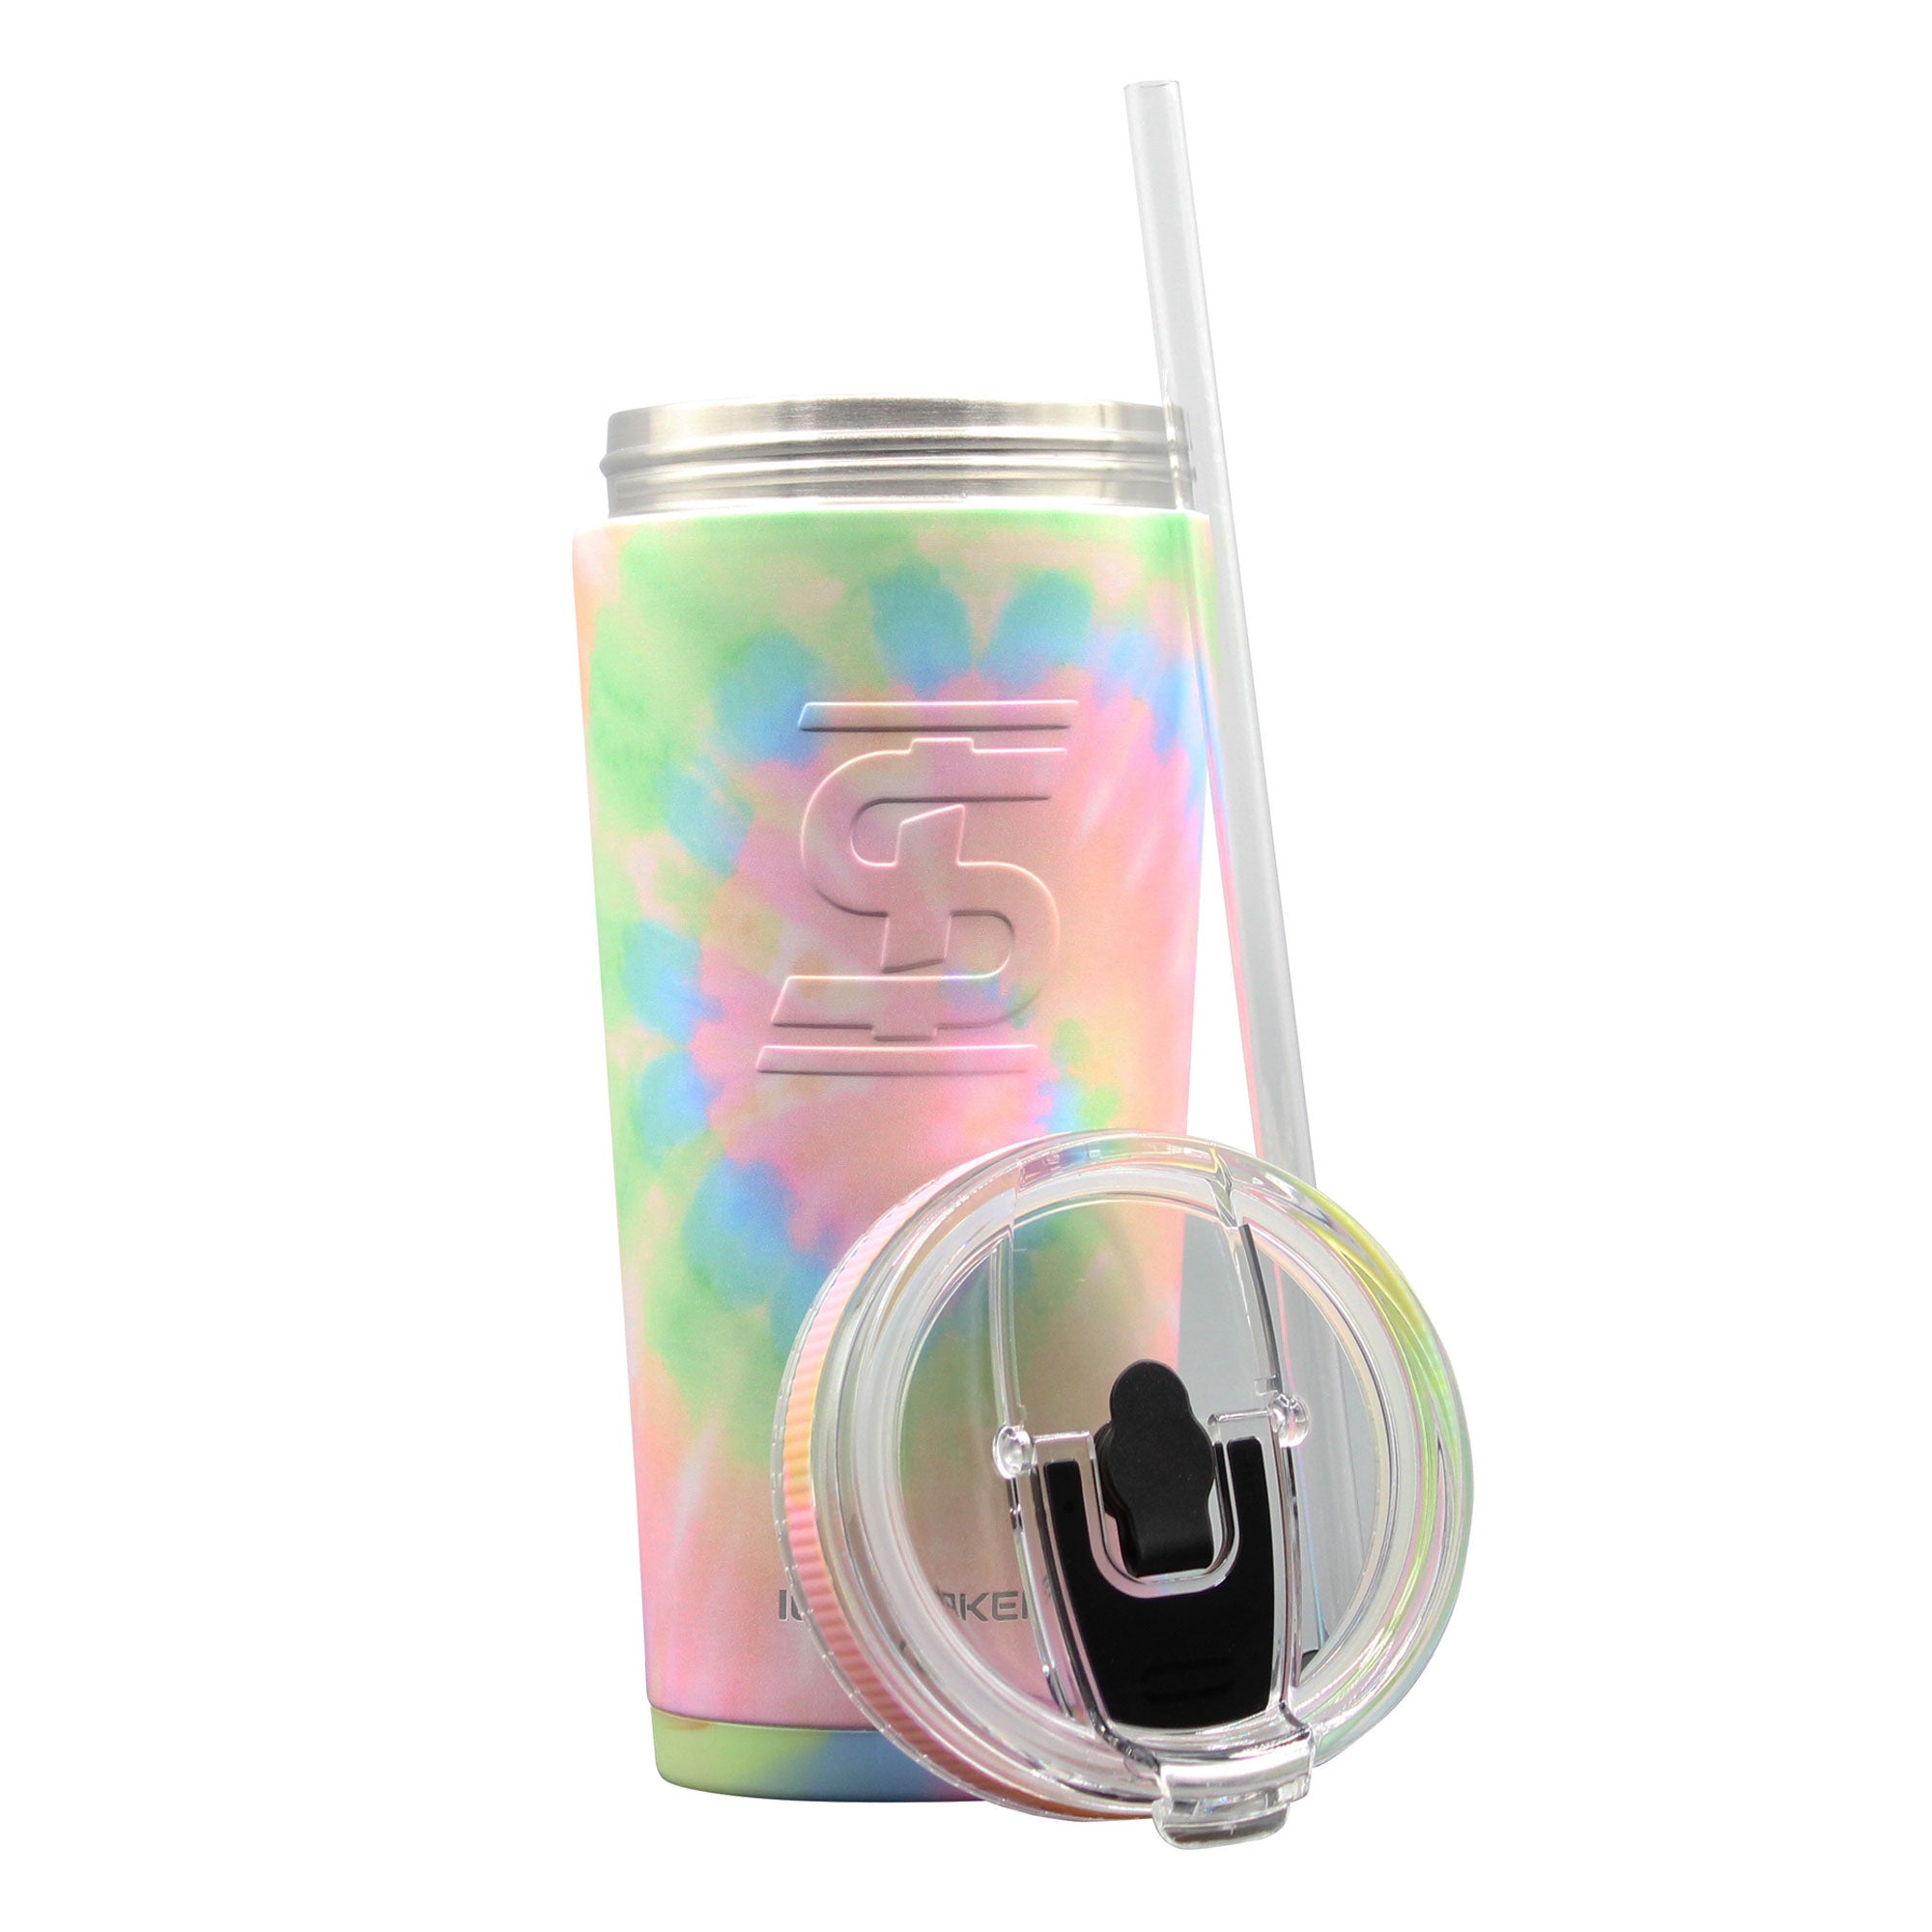 Insulated Tumbler With Handle And Tie Dye Design - Reusable Vacuum